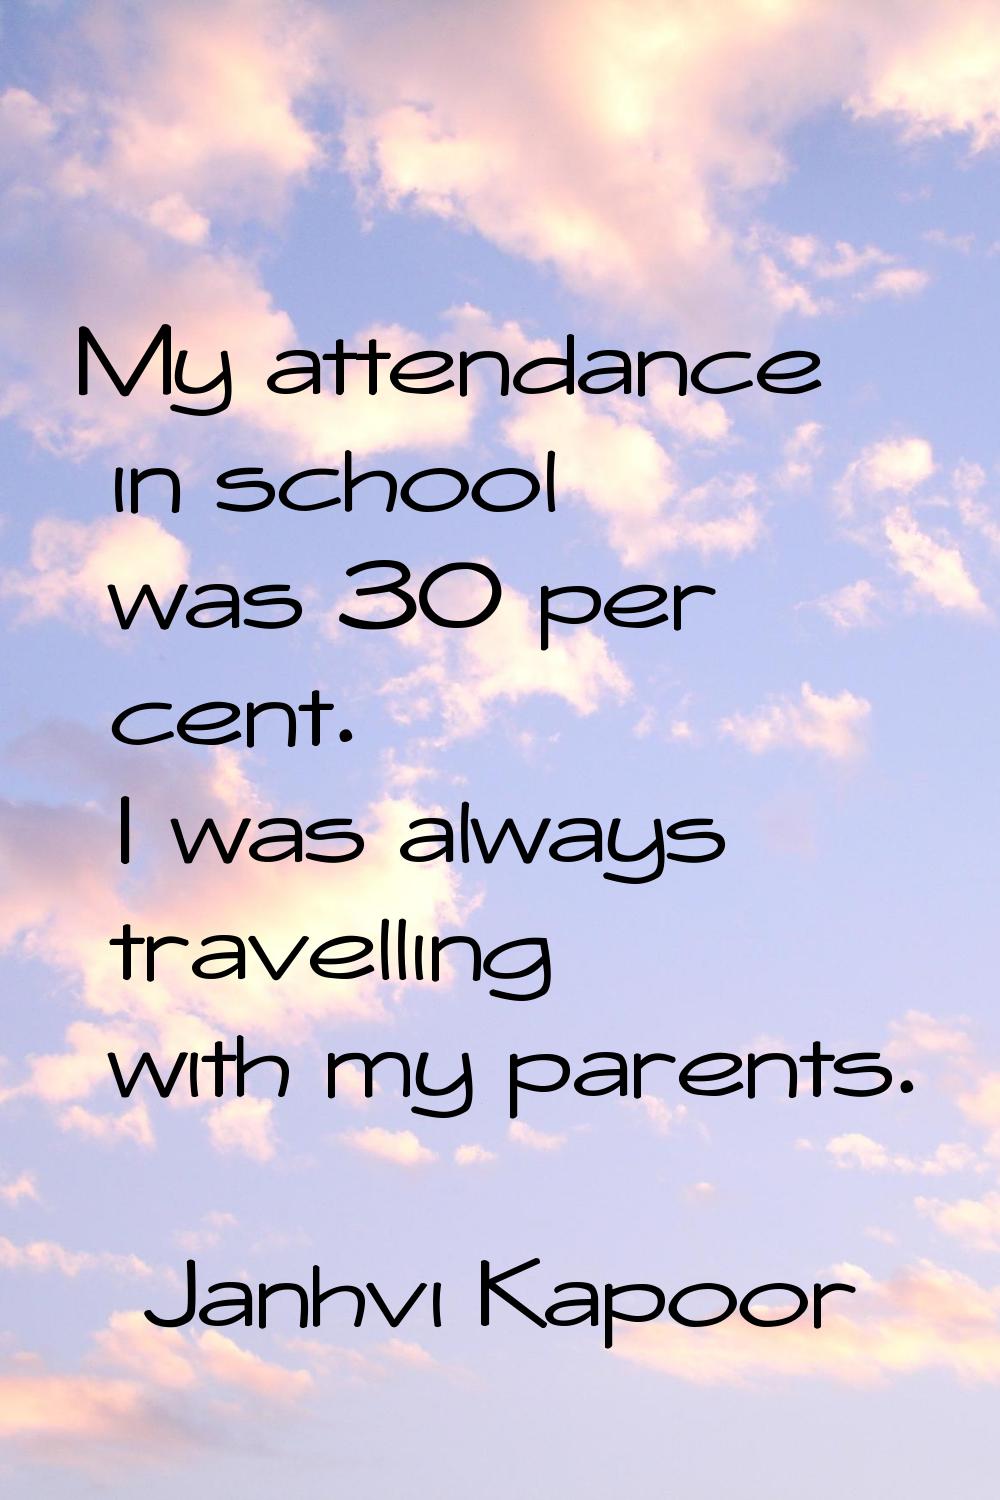 My attendance in school was 30 per cent. I was always travelling with my parents.